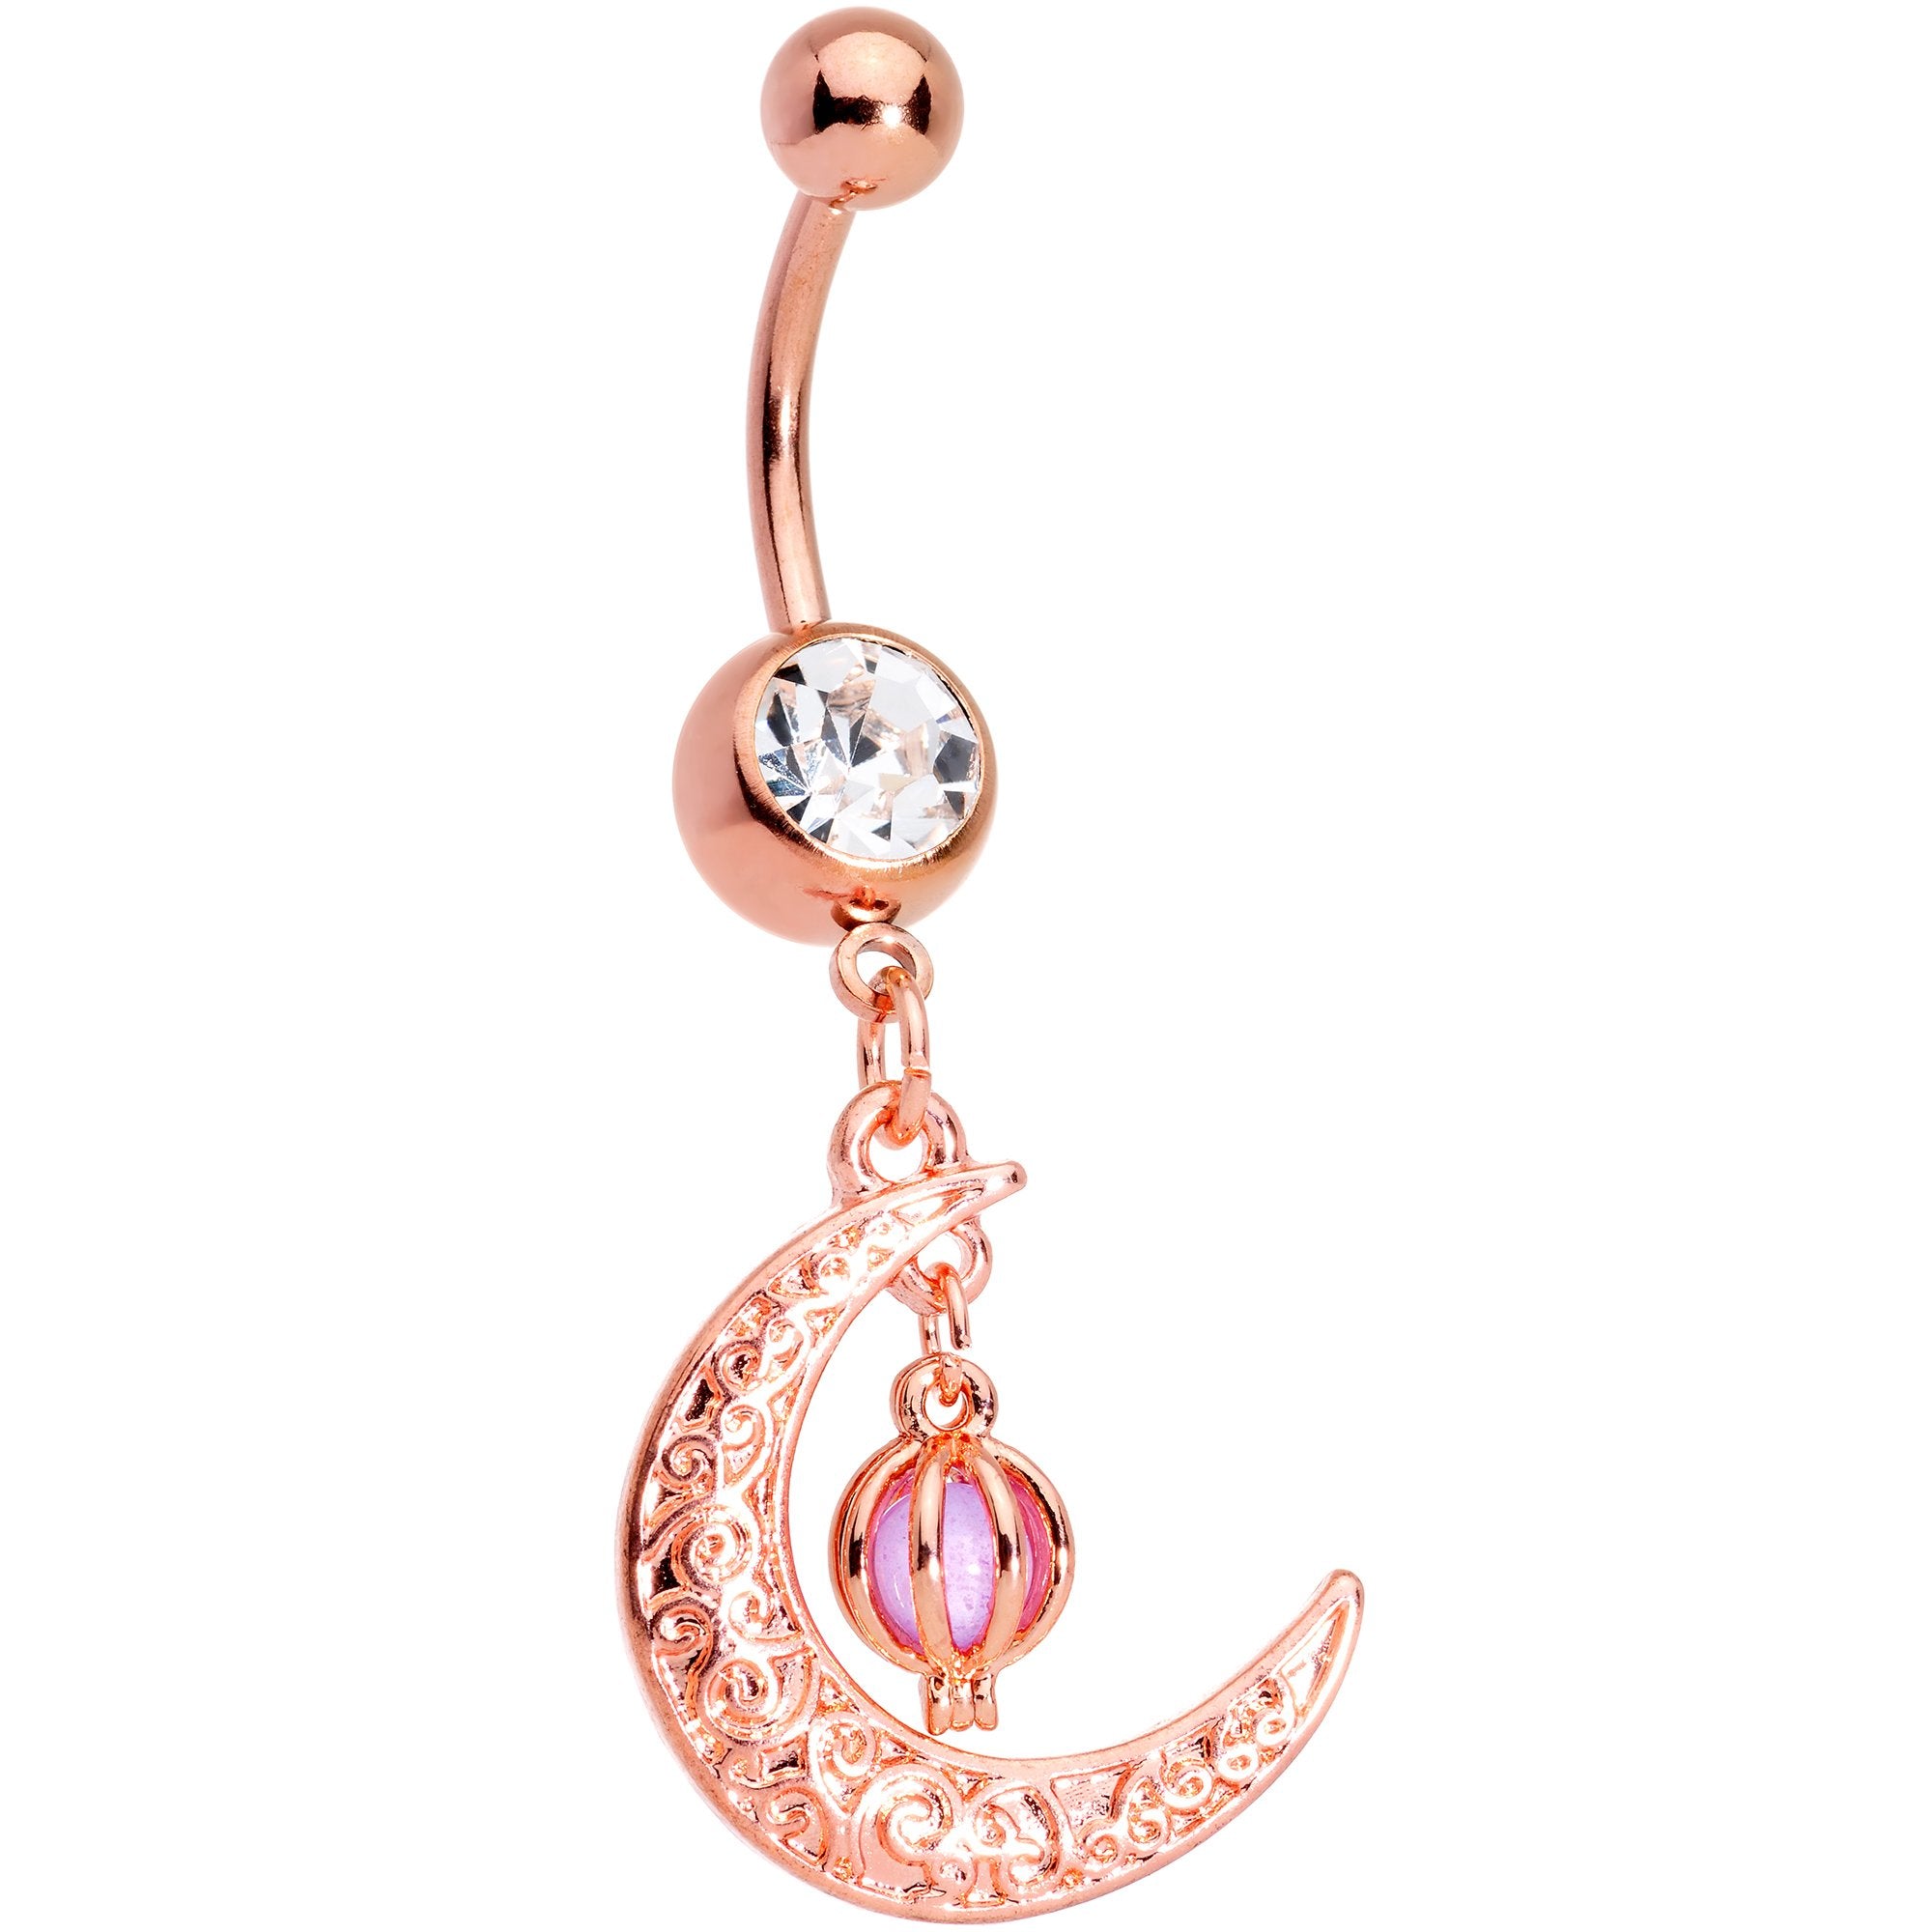 Clear Gem Rose Gold Tone Ornate Moon Orb Dangle Belly Ring